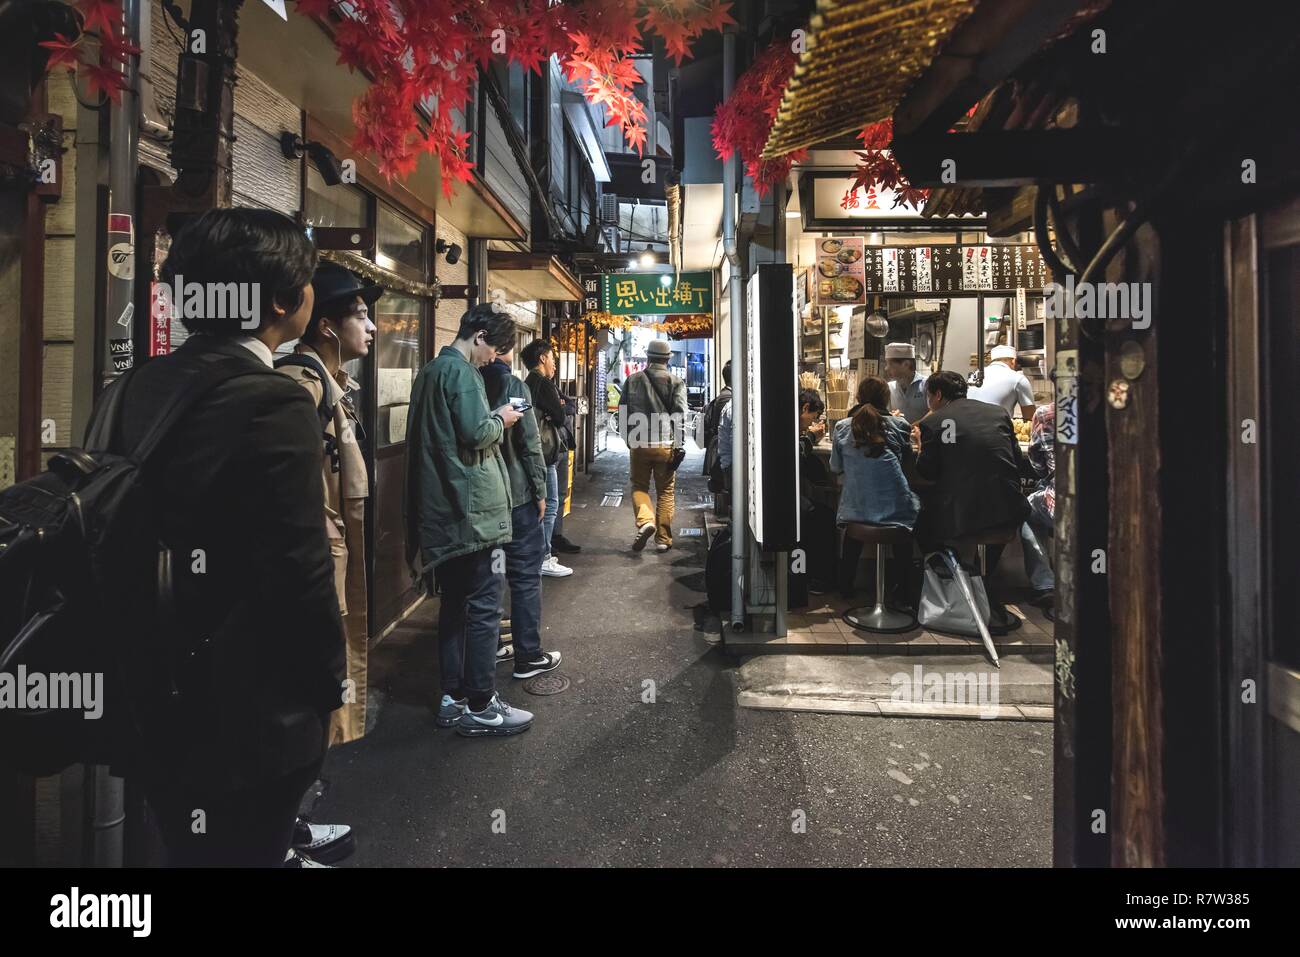 Japan, Shinjuku district, Tokyo, Yakitori alley is famous for its small restaurants. People are queing up for street food late at night Stock Photo